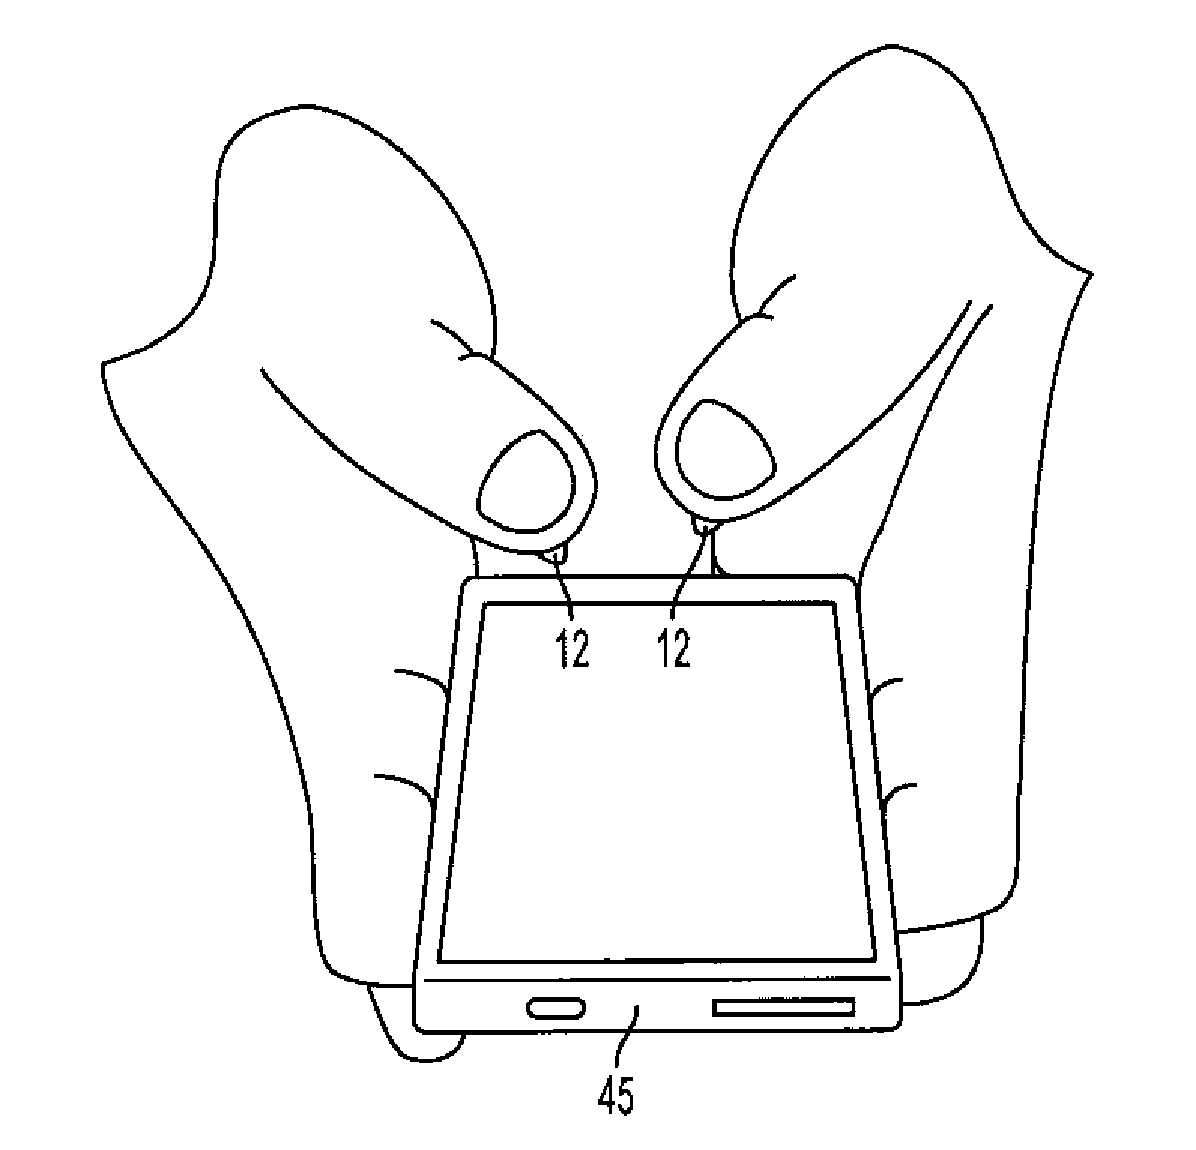 Interface enhancement component for use with electronic touch-screen devices